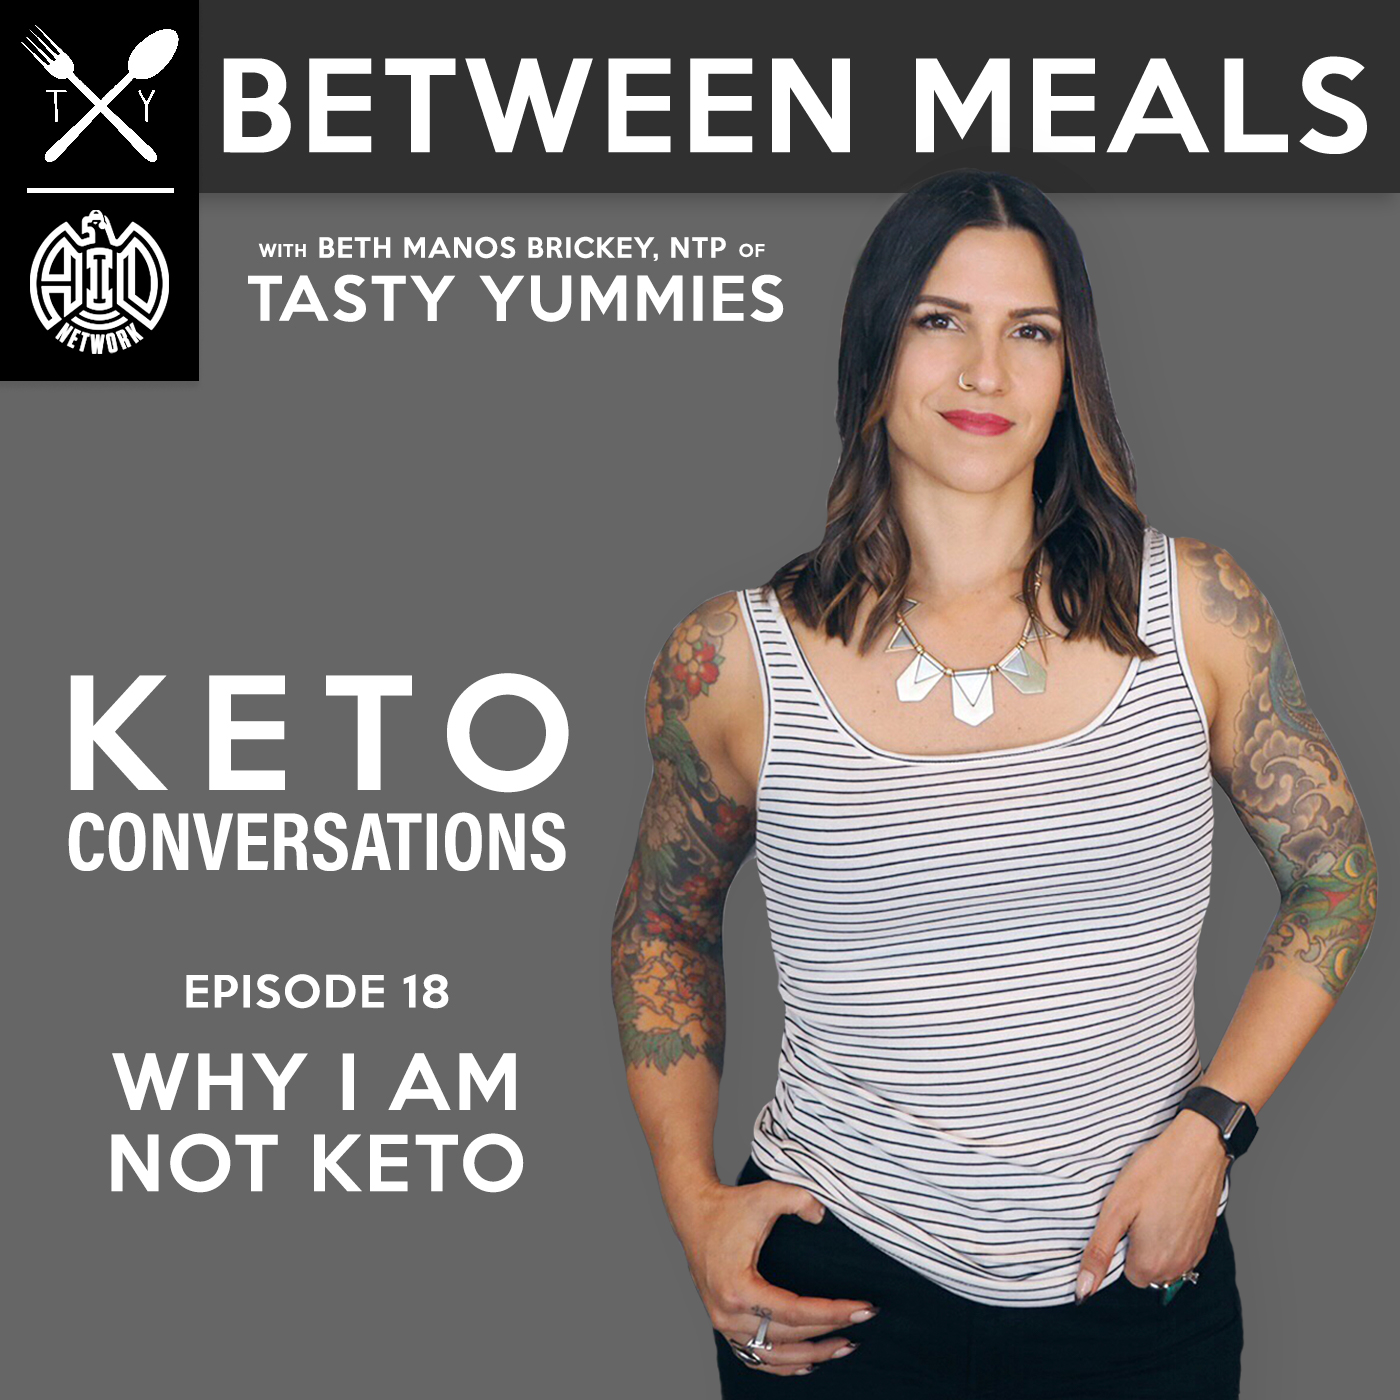 Between Meals Podcast. Episode 18: Why I Am Not Keto